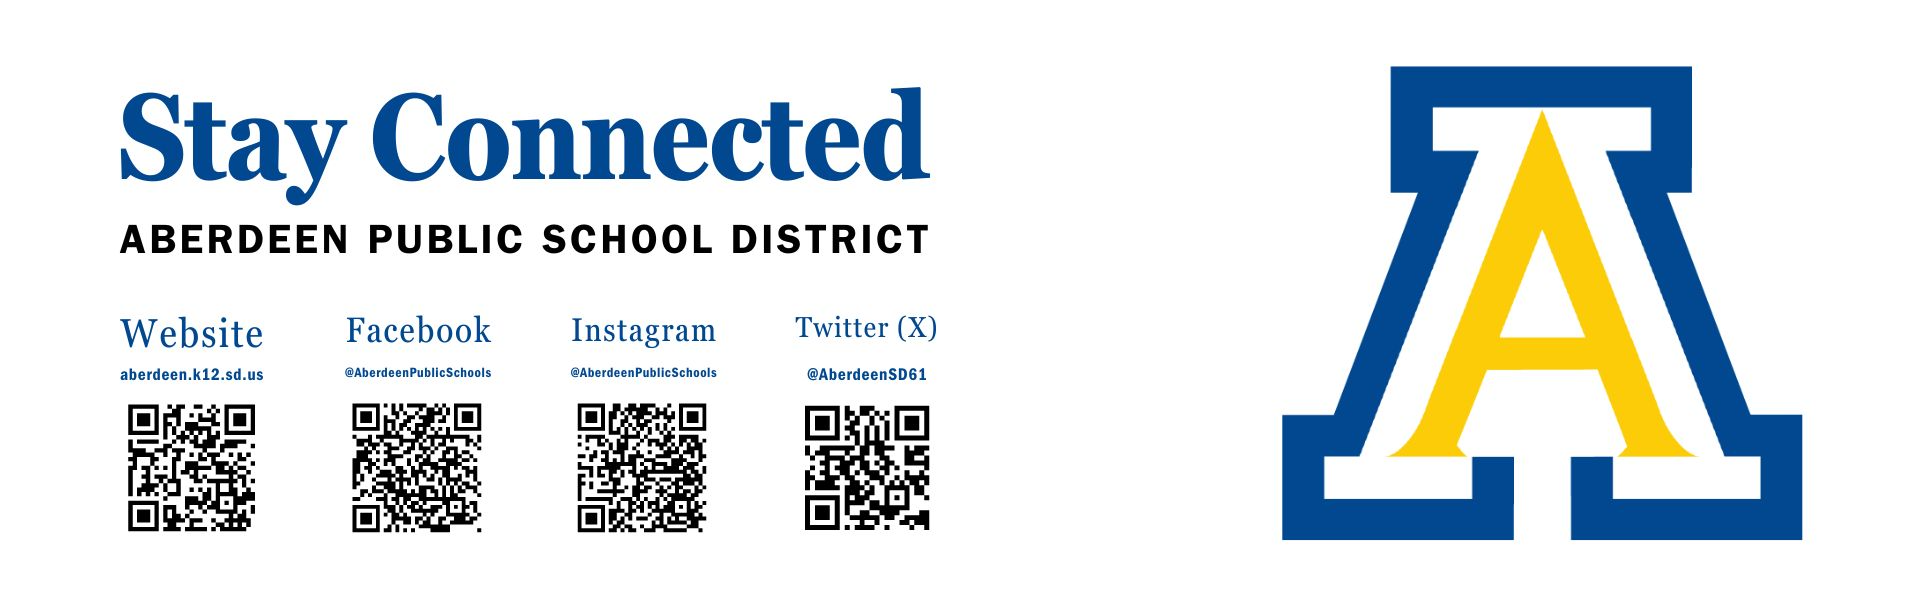 Stay connected - Aberdeen Public School District; QR codes for the district's website, Facebook, Instagram, Twitter, and "A" logo